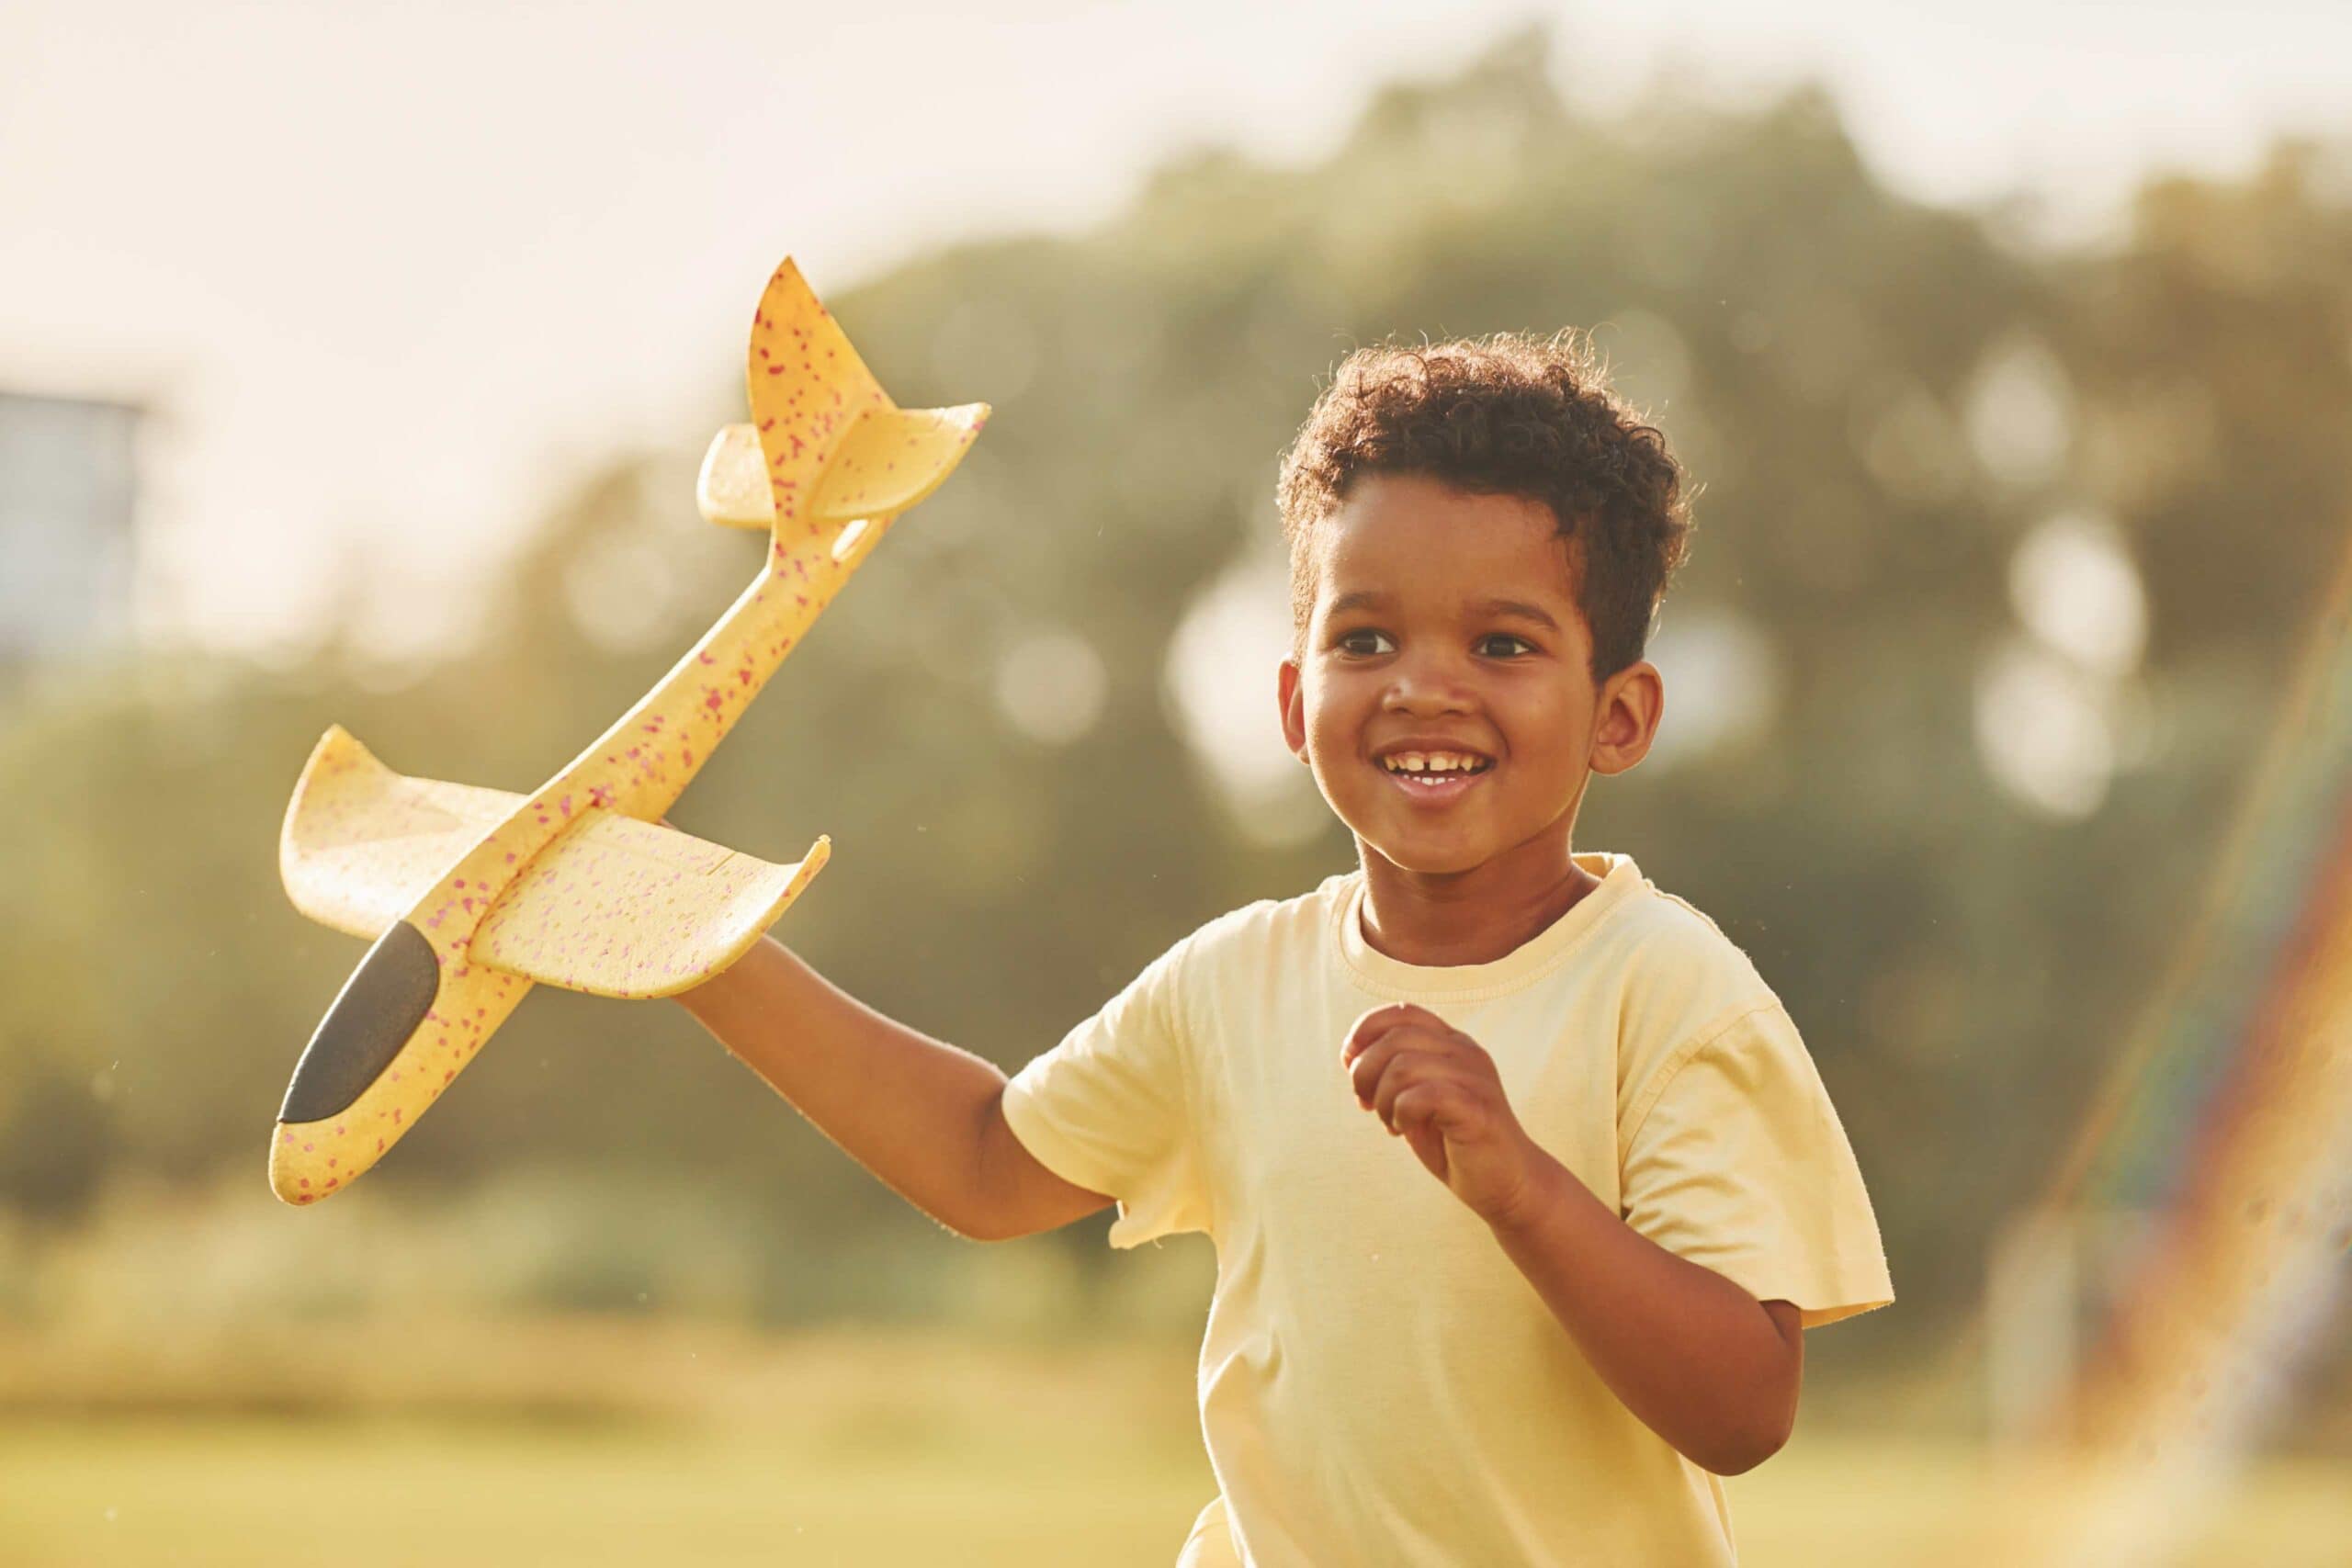 African American boy running with a toy plane and smiling.